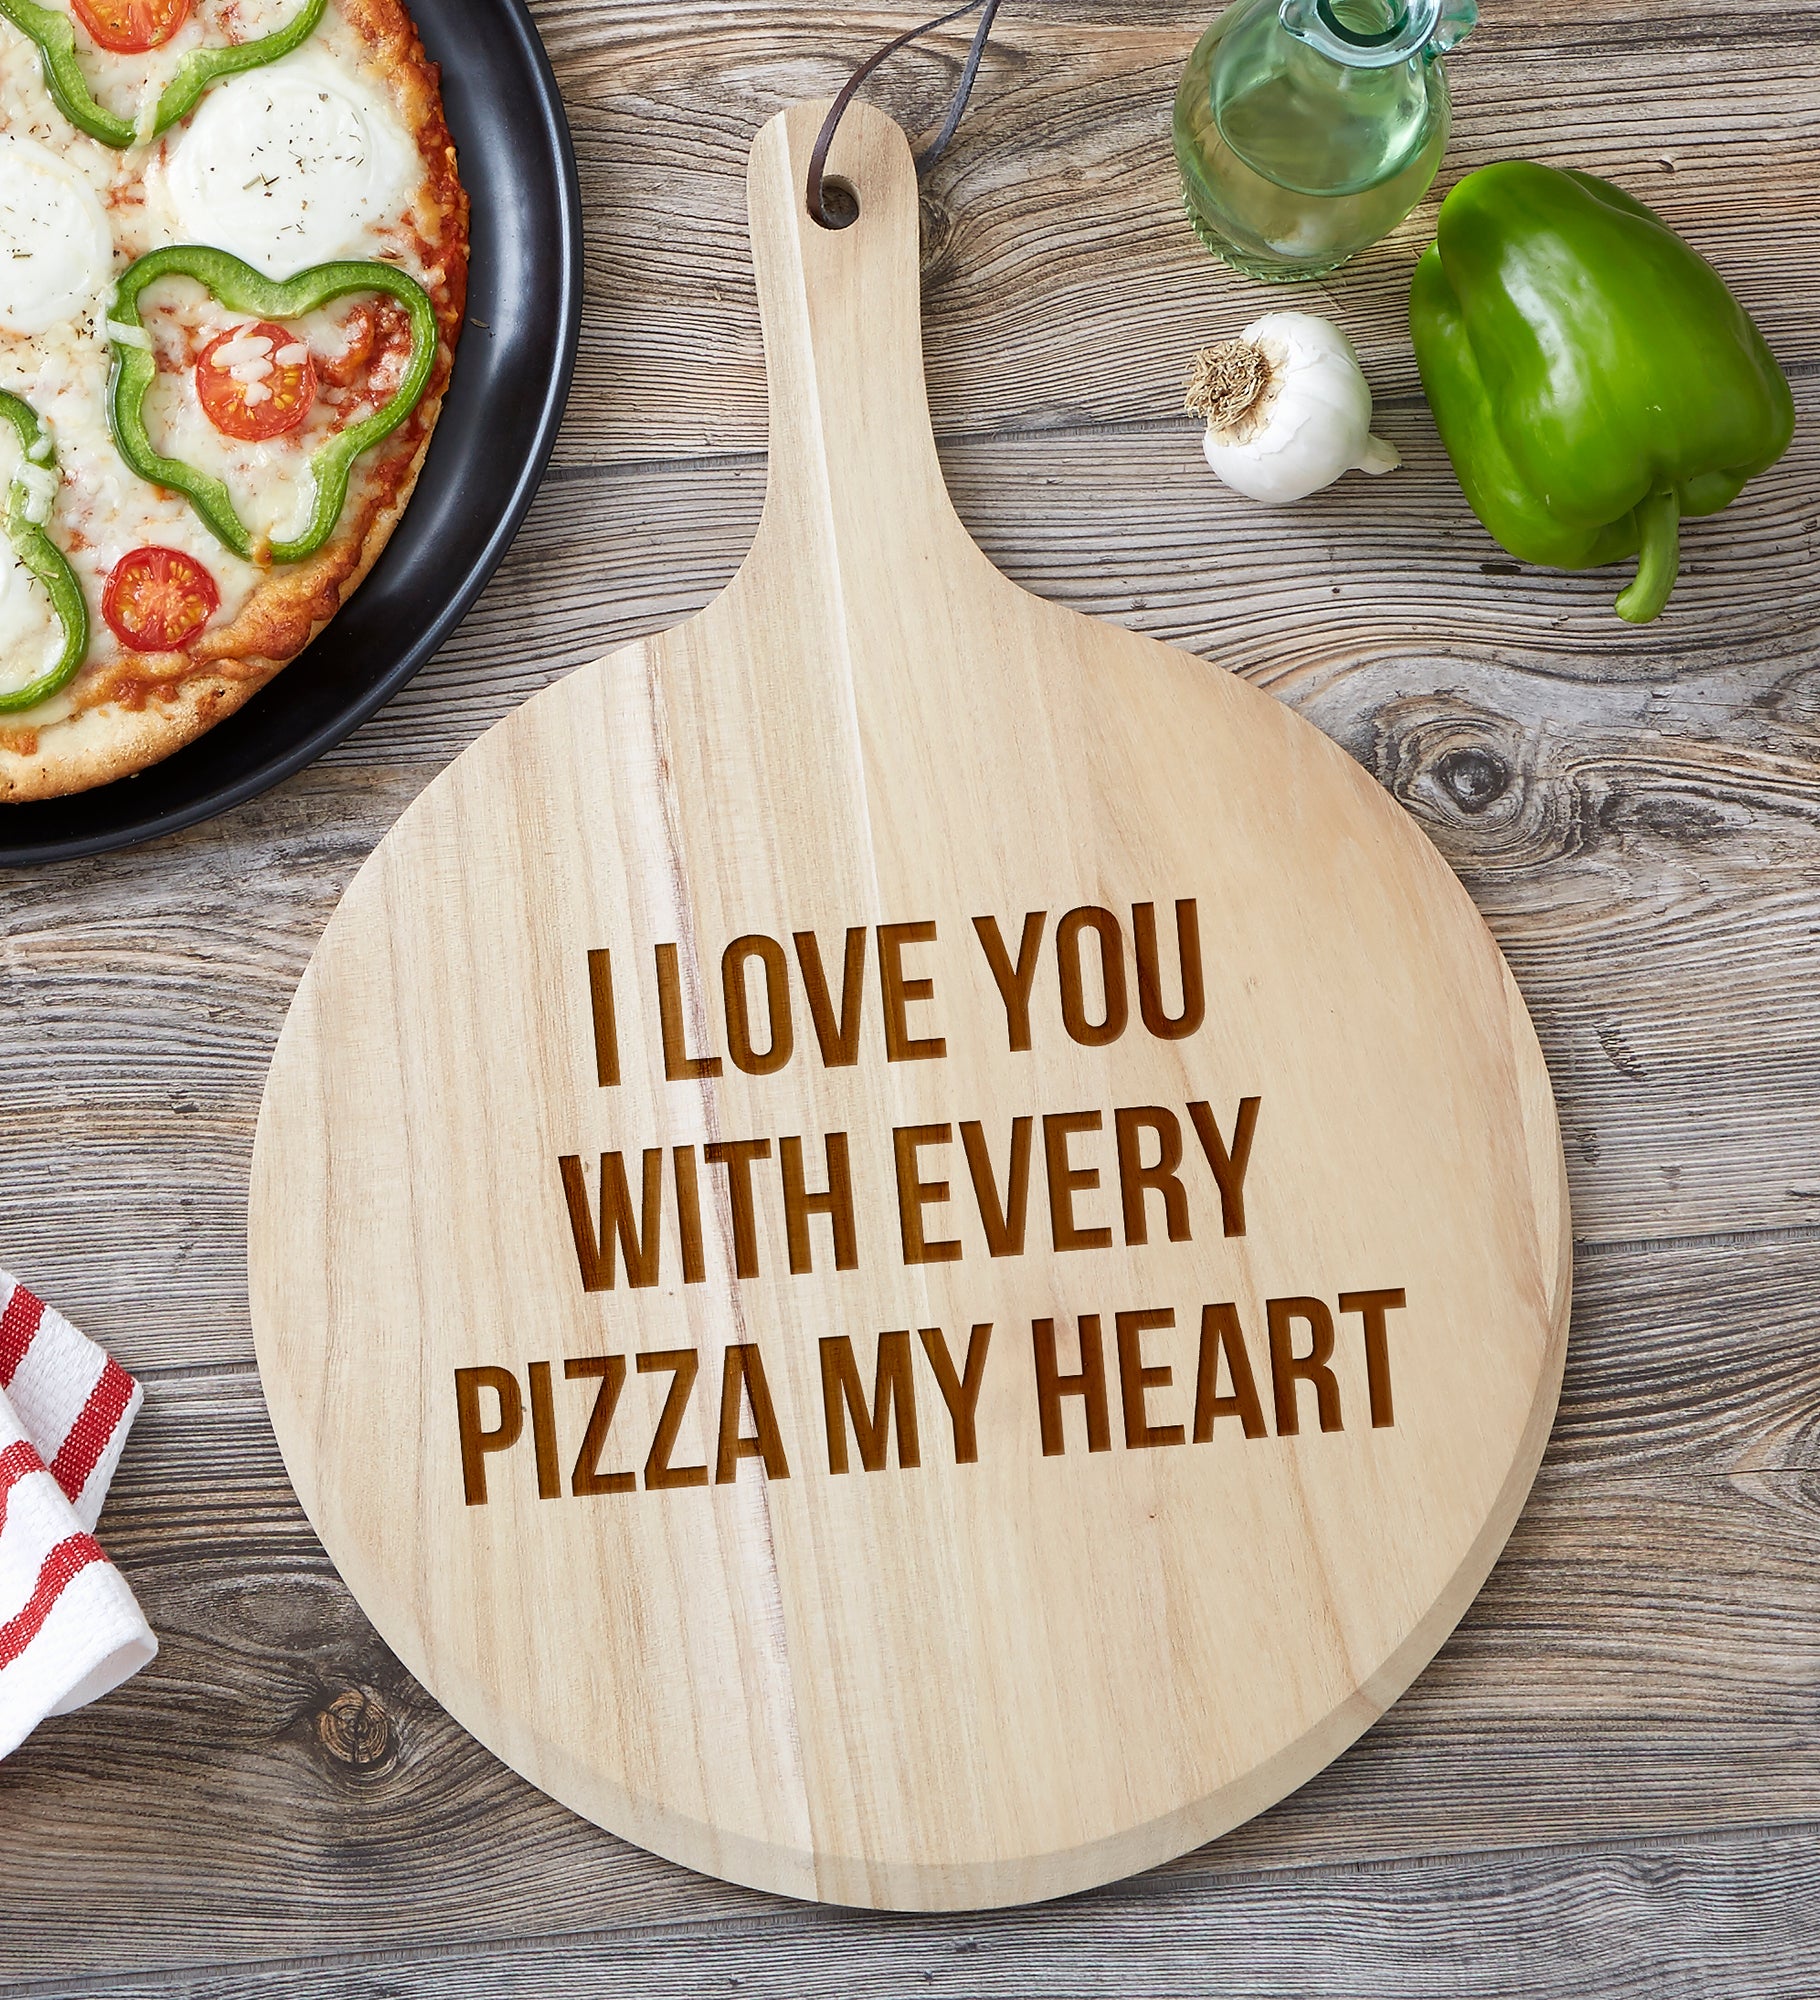 Pizza Expressions Personalized 2pc Pizza Board Gift Set